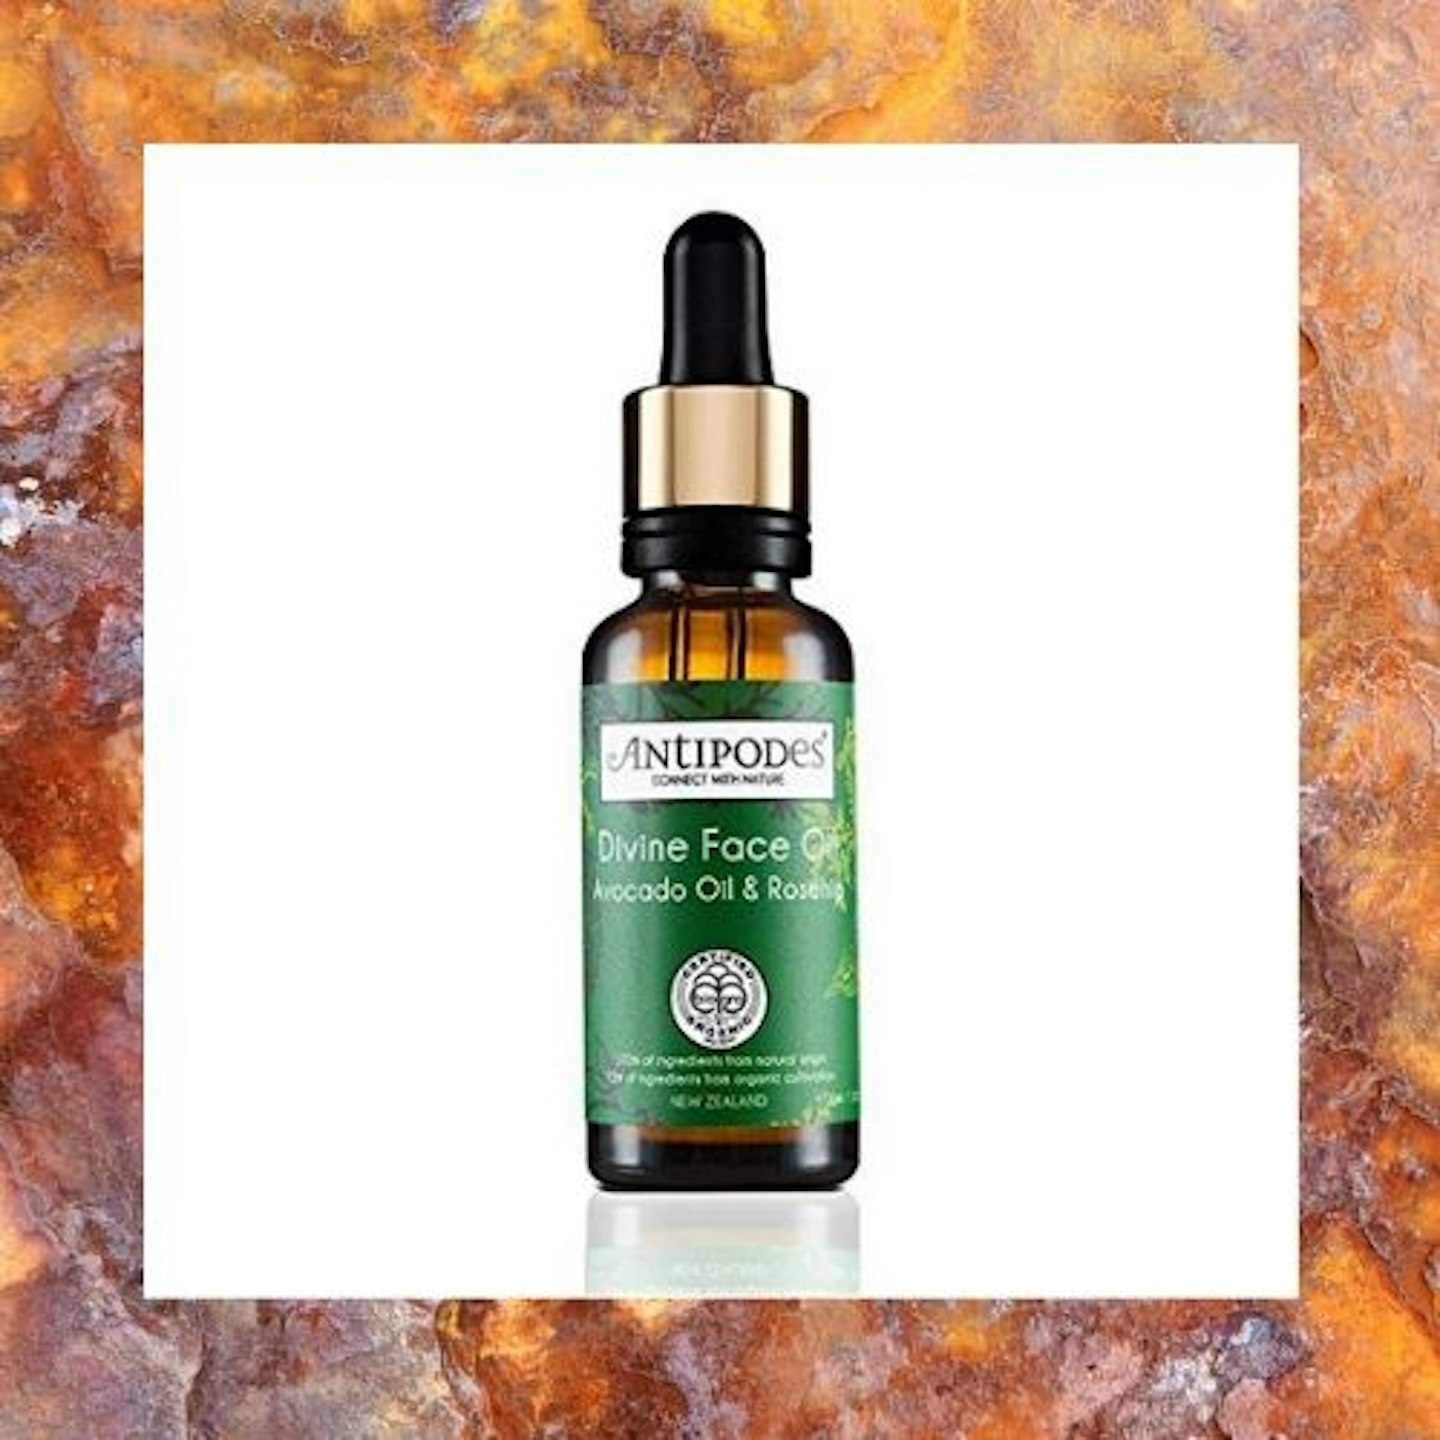 Antipodes Organic Divine Face Oil with Avocado Oil & Rosehip